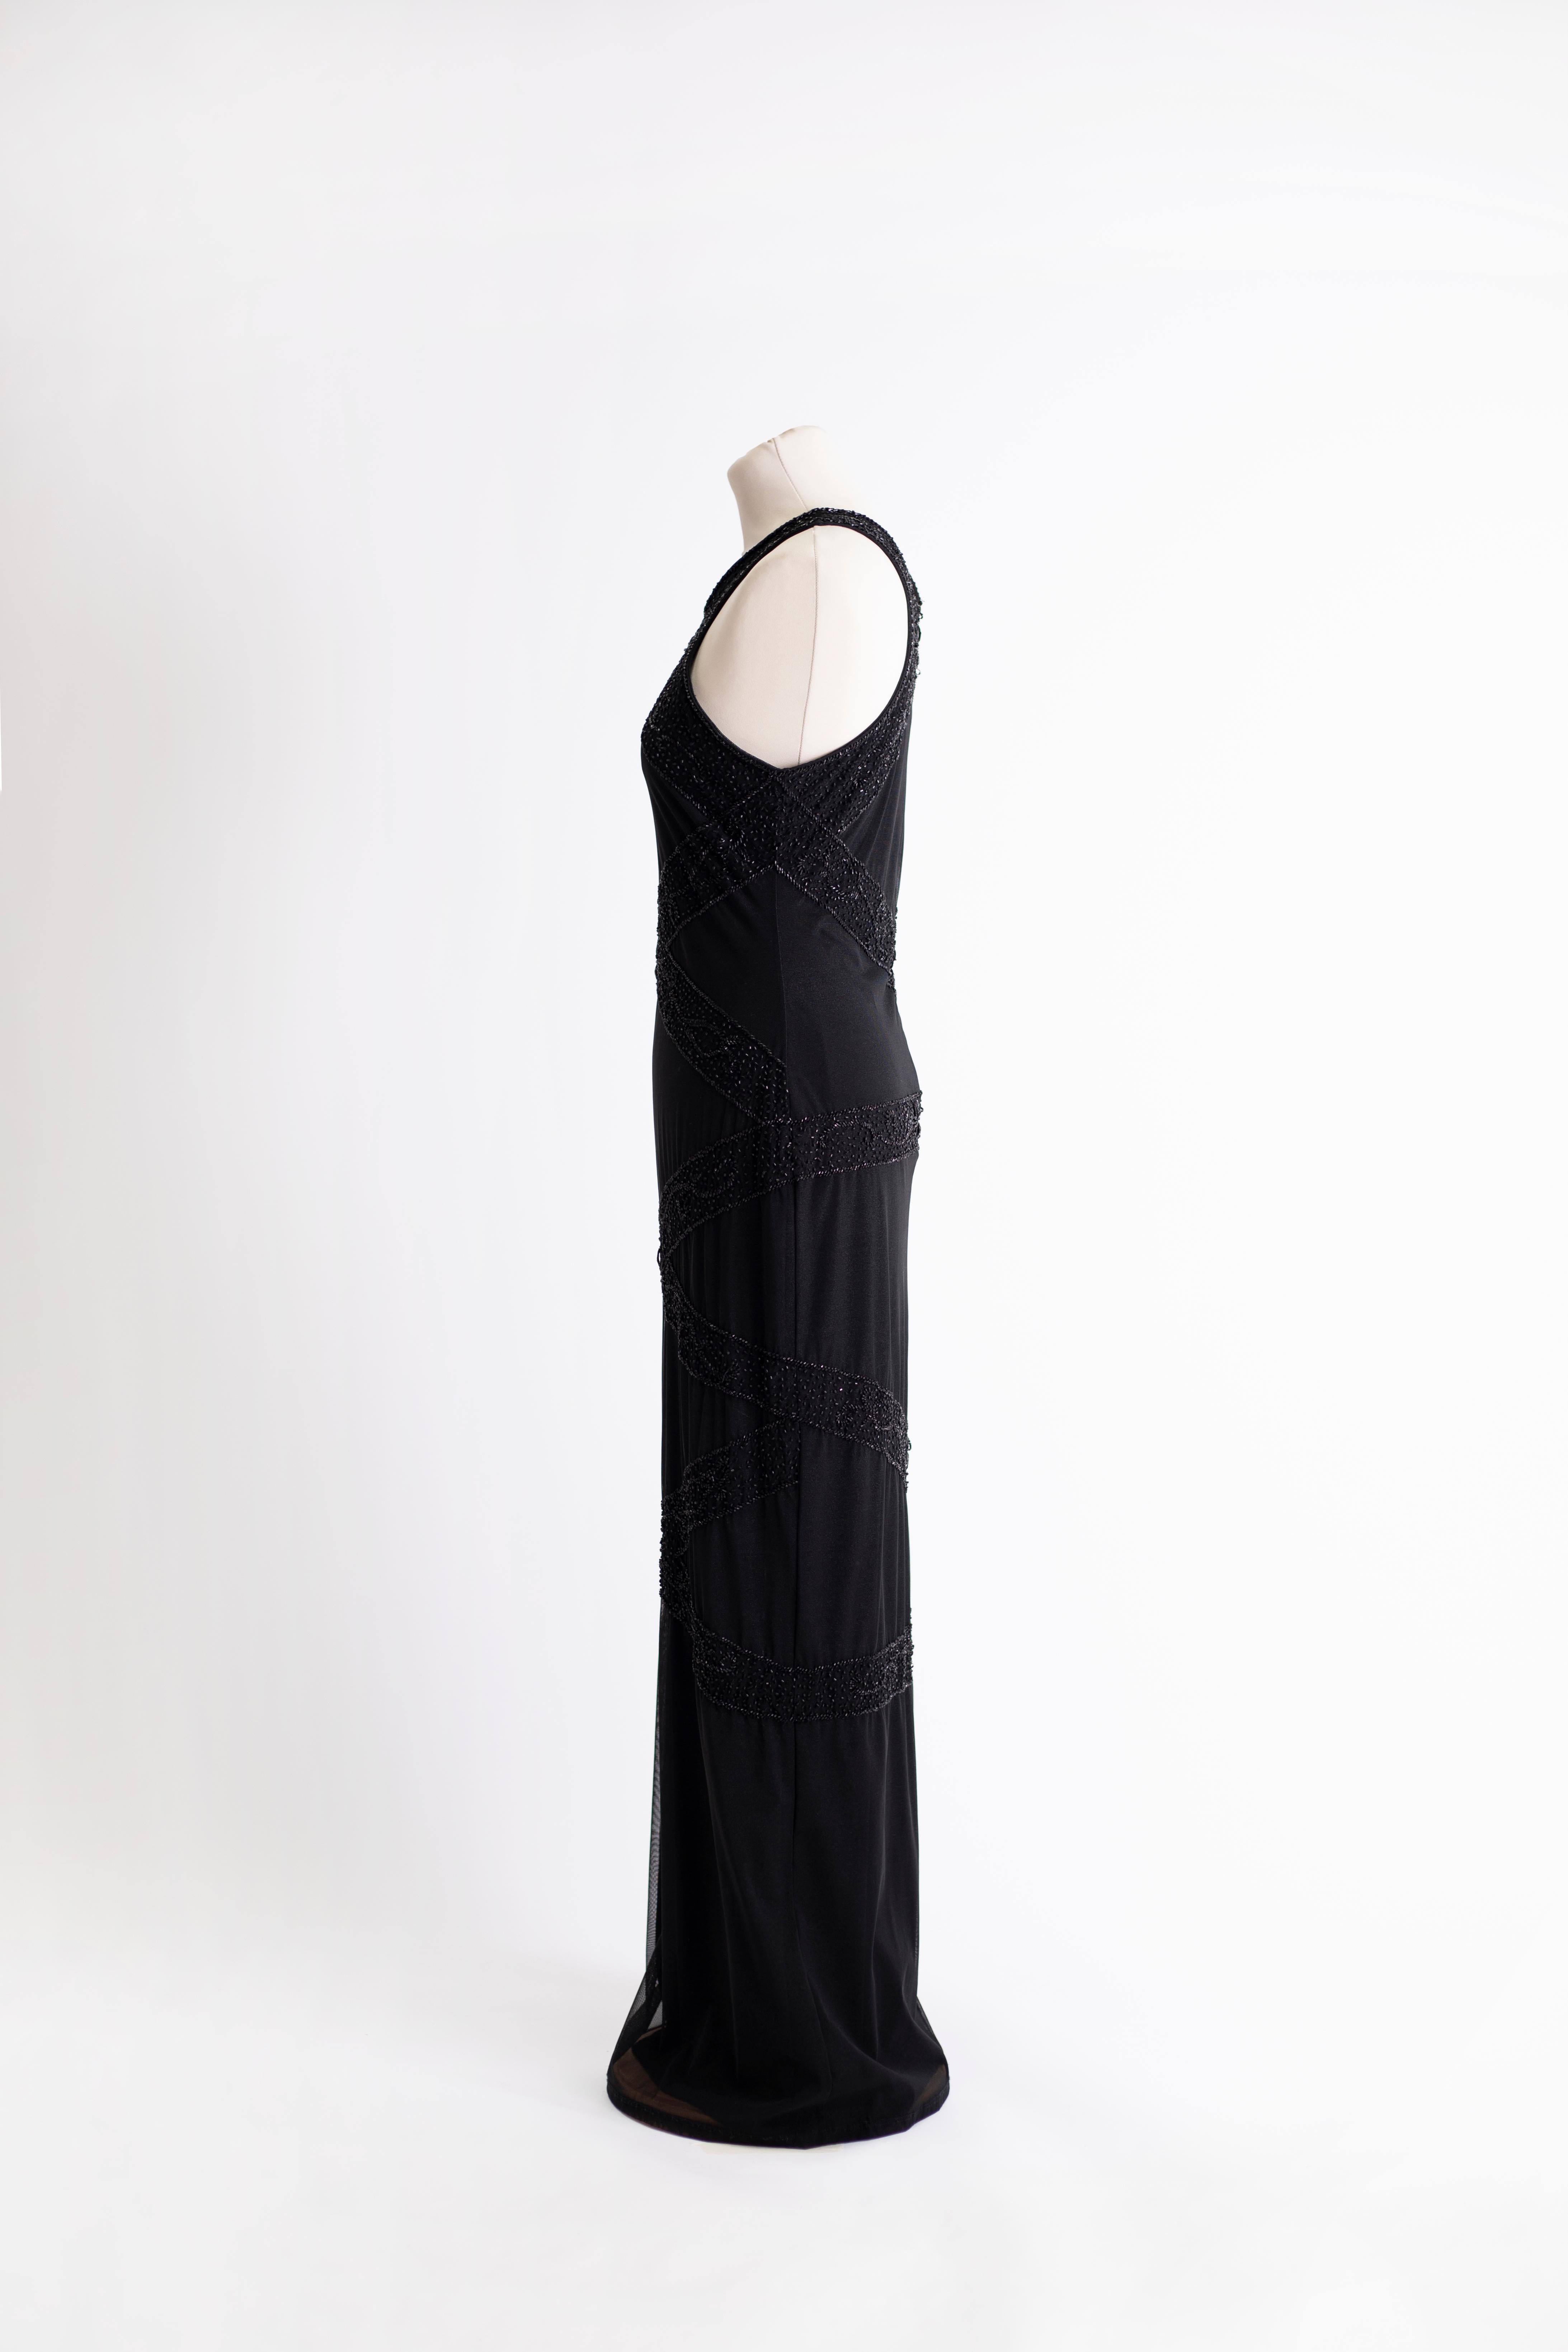 Long black dress with halter neck. Stretch fabric in polyester and spandex. Beaded embroidery.

Size: L

Stretch
Waist: 74 cm
Length: 143 cm
Bust: 86 cm